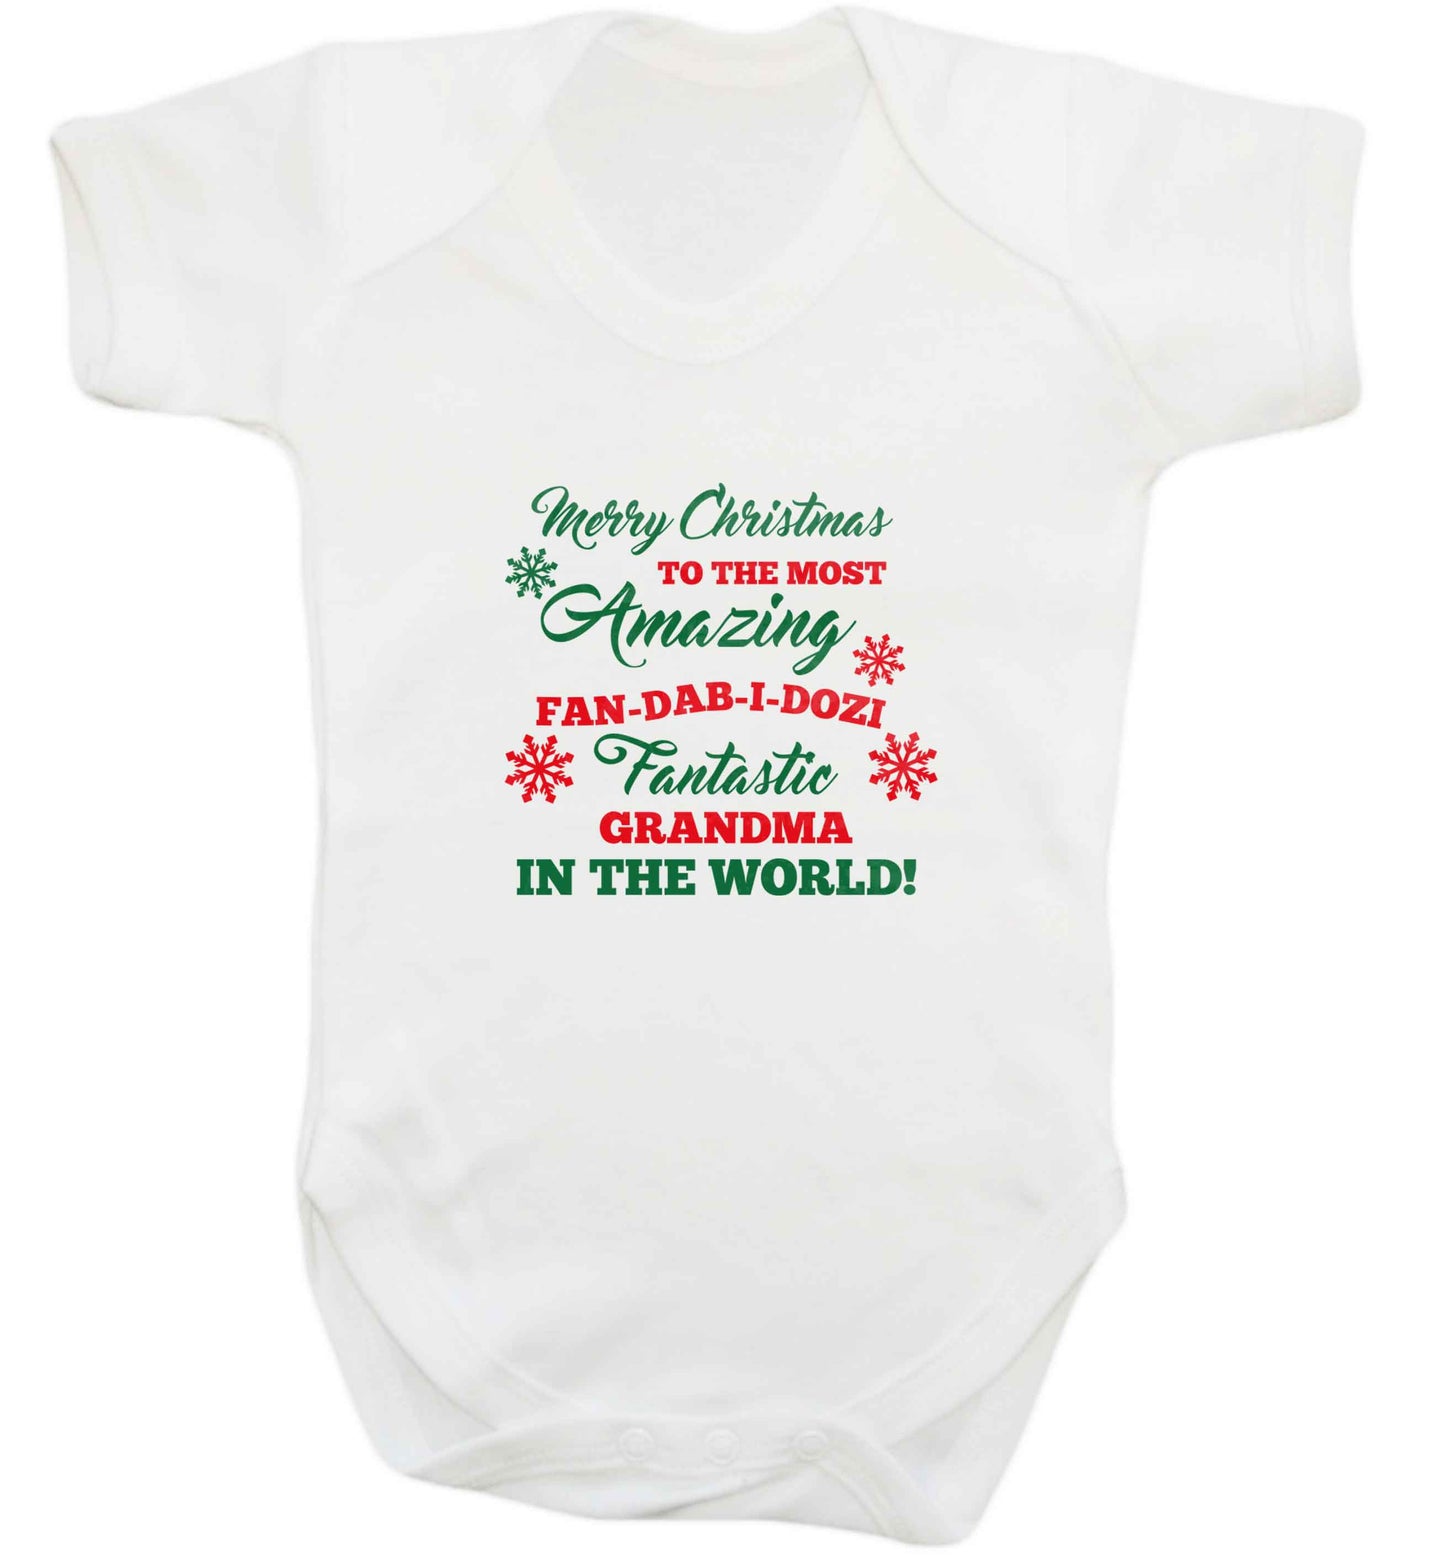 Merry Christmas to the most amazing fan-dab-i-dozi fantasic Grandma in the world baby vest white 18-24 months